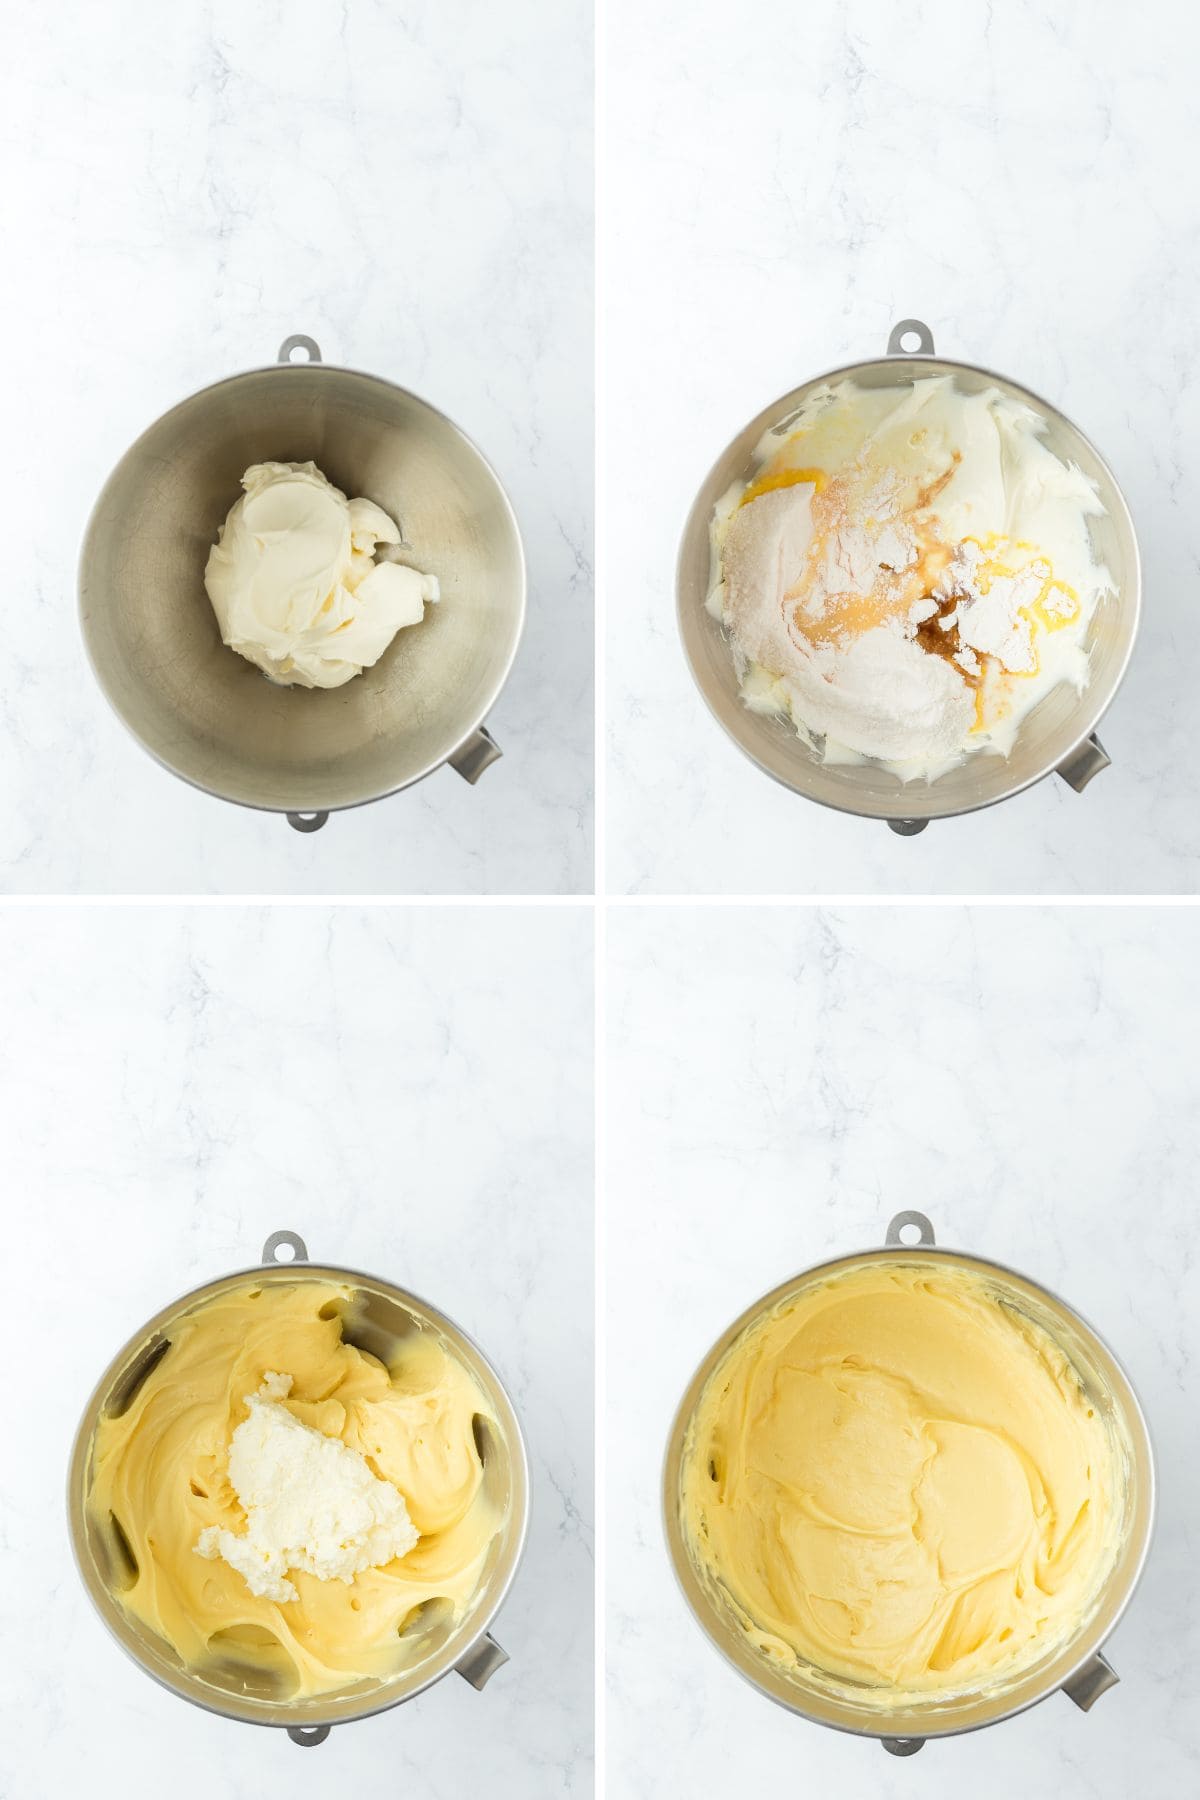 A collage showing the steps for beating the cream cheese and adding other ingredients to make the banana tiramisu filling.